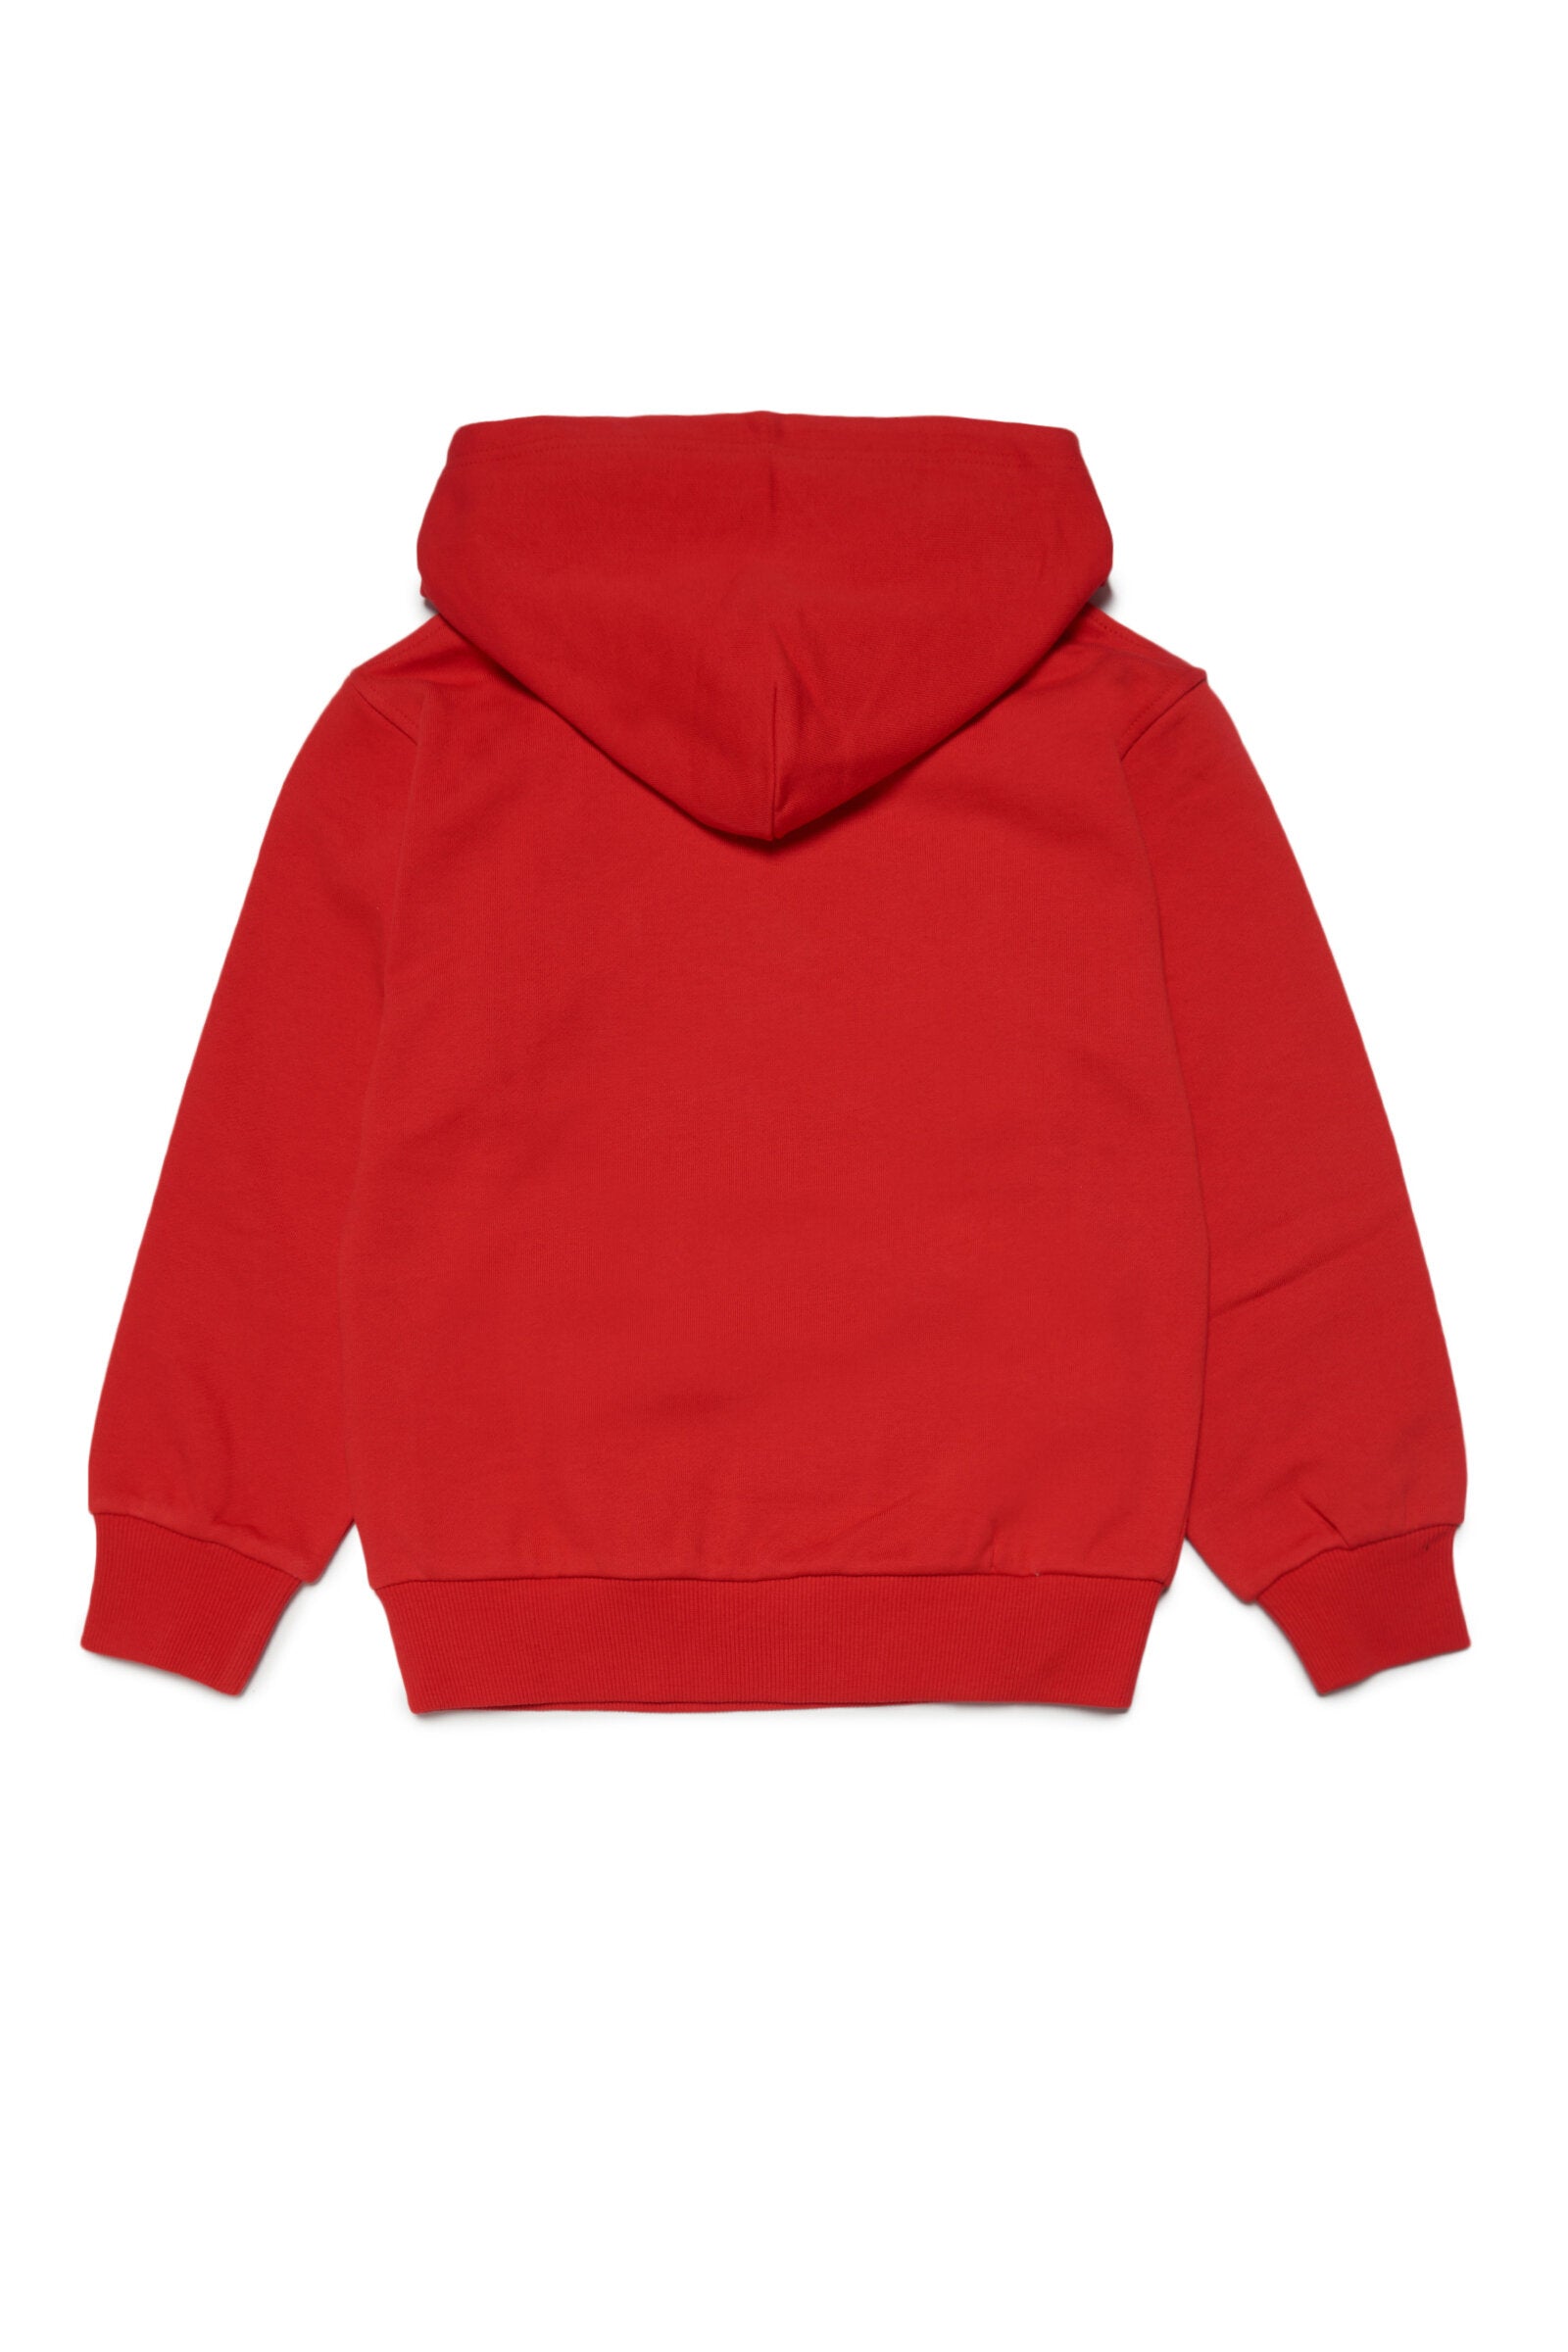 effect for watercolour Diesel logo sweatshirt hooded | Brave with red Kid children